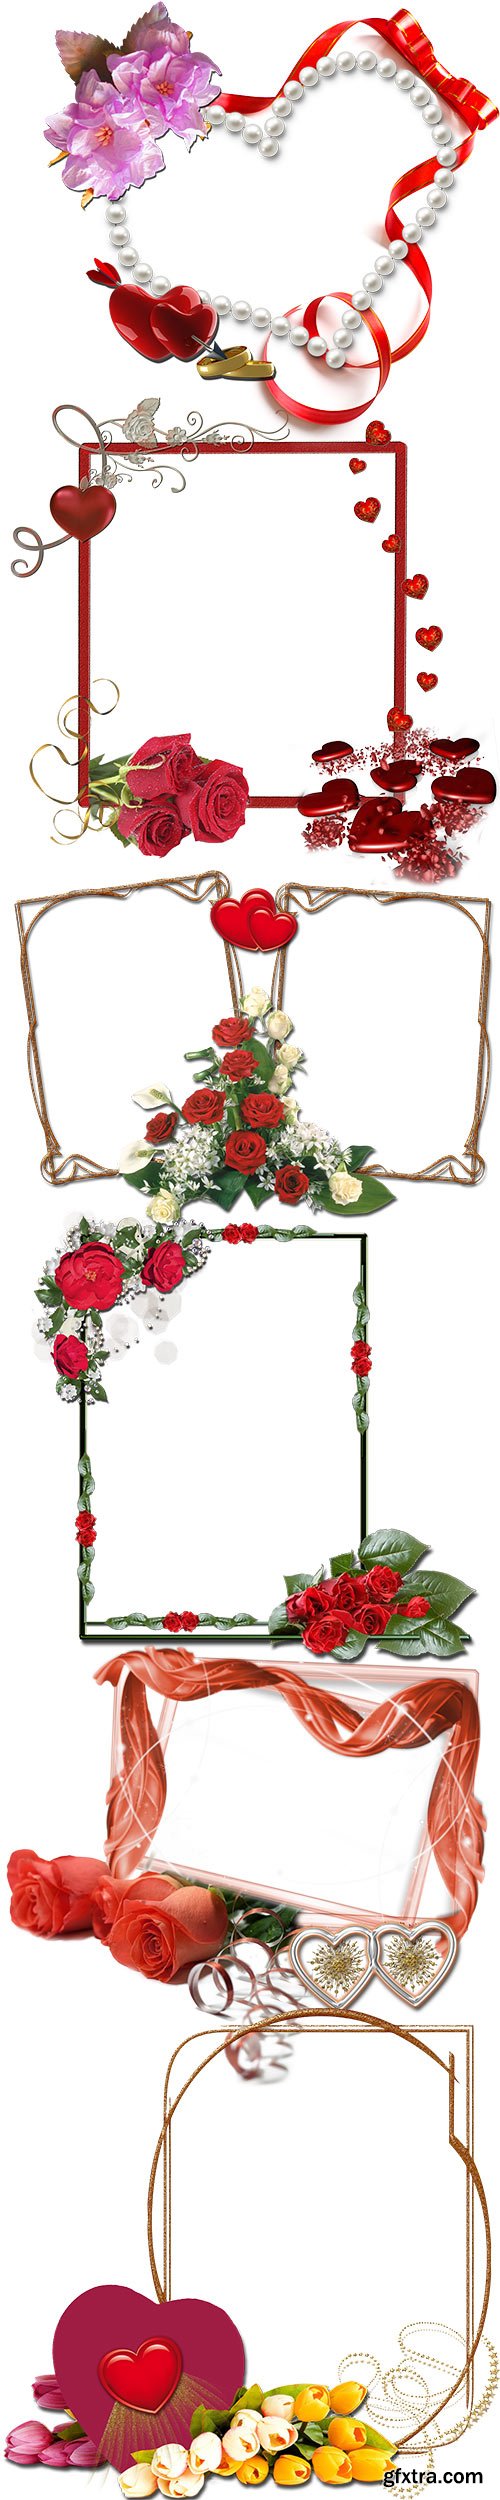 Frame cutouts of flowers and hearts for Valentine